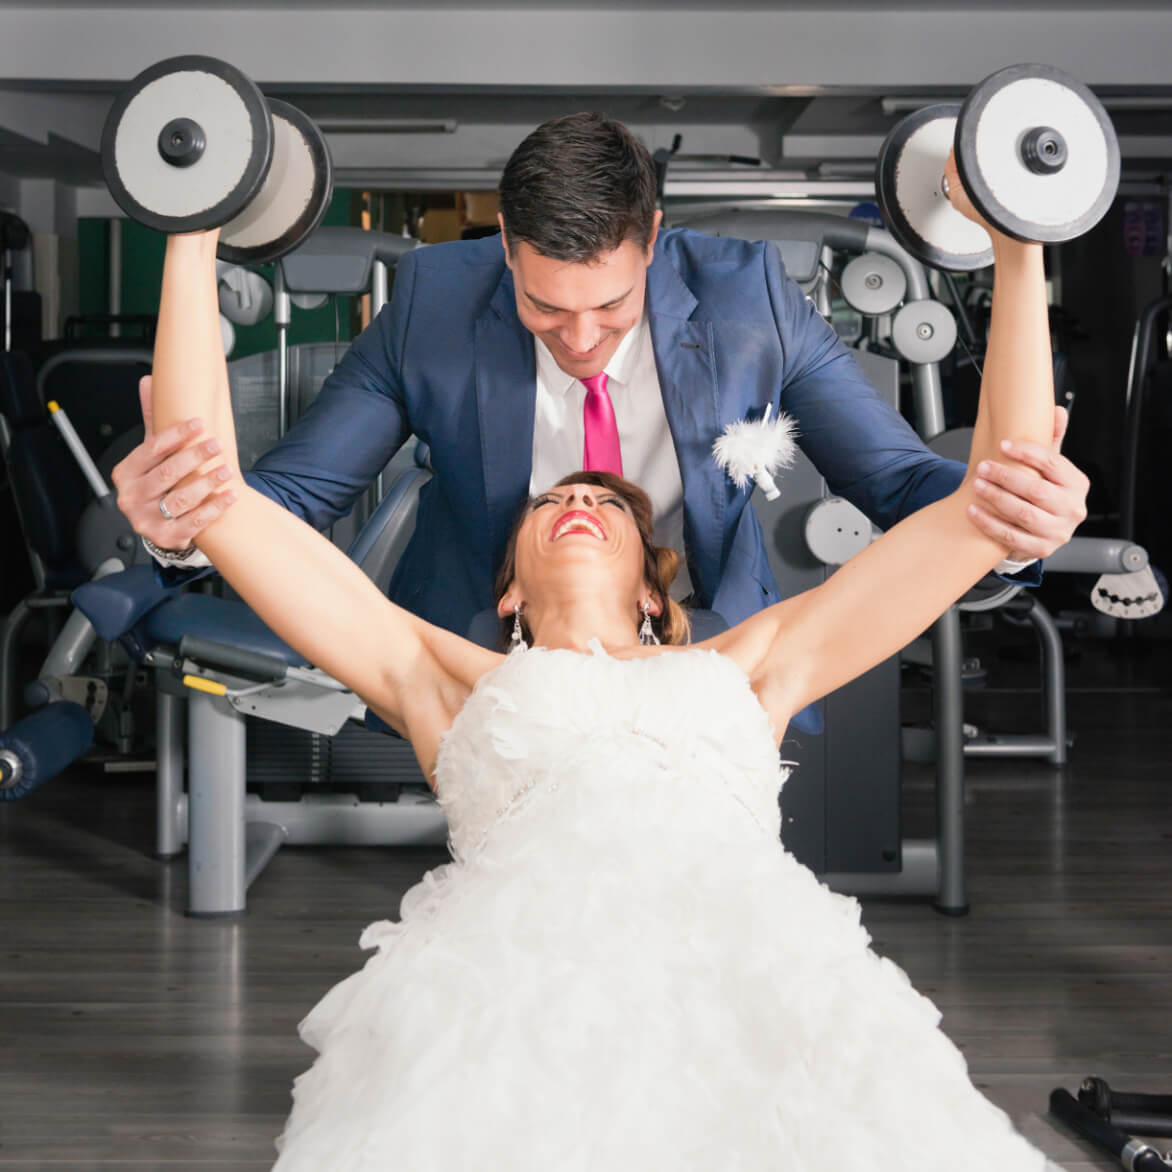 How to get your perfect wedding day body